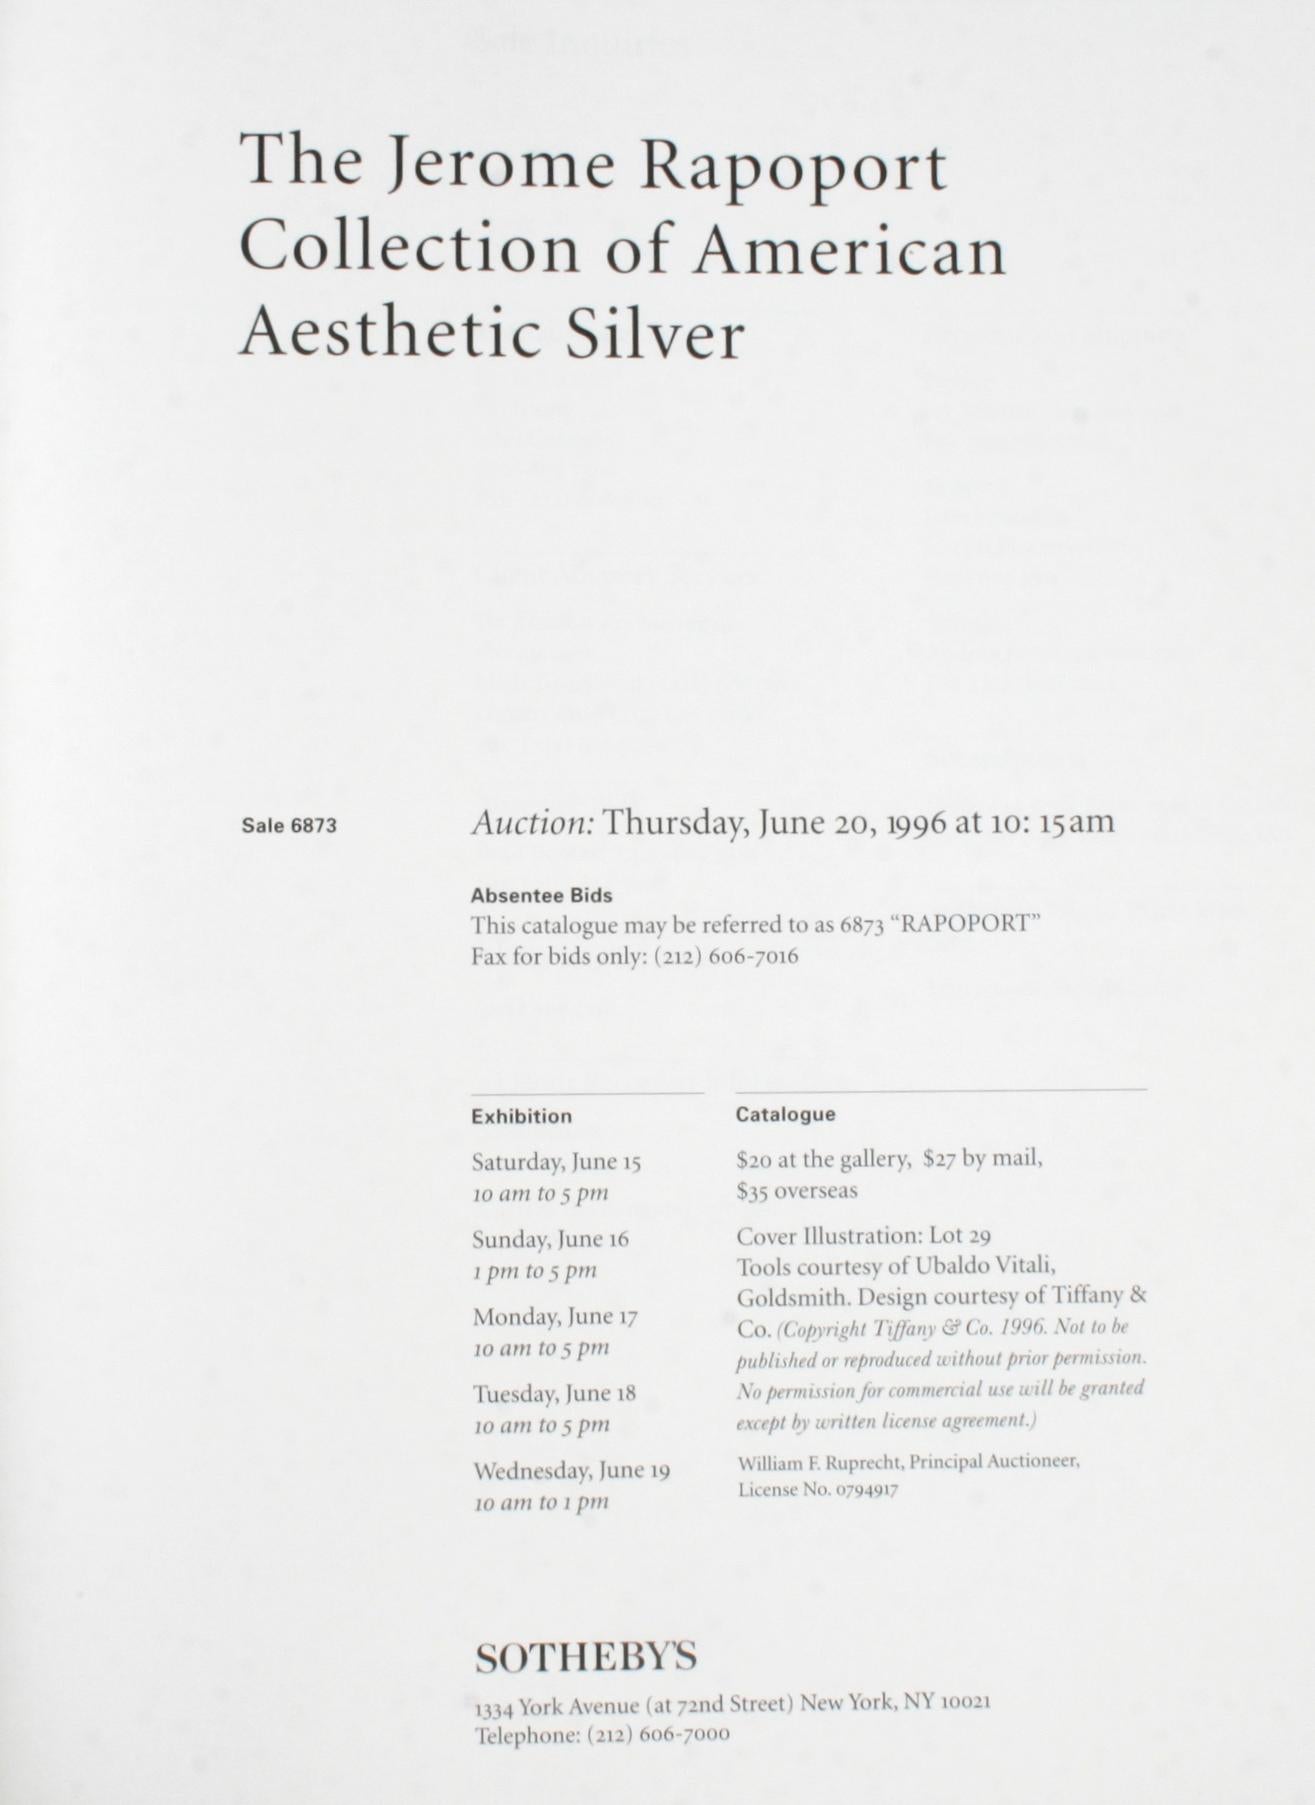 Sotheby's; The Jerome Rapoport Collection of American Aesthetic Silver. New York: Sotheby's, 1996. Unpaginated softcover. In the 1870's the American Aesthetic Movement broke from Traditional Design motives and moved toward Japonism. Pieces include a